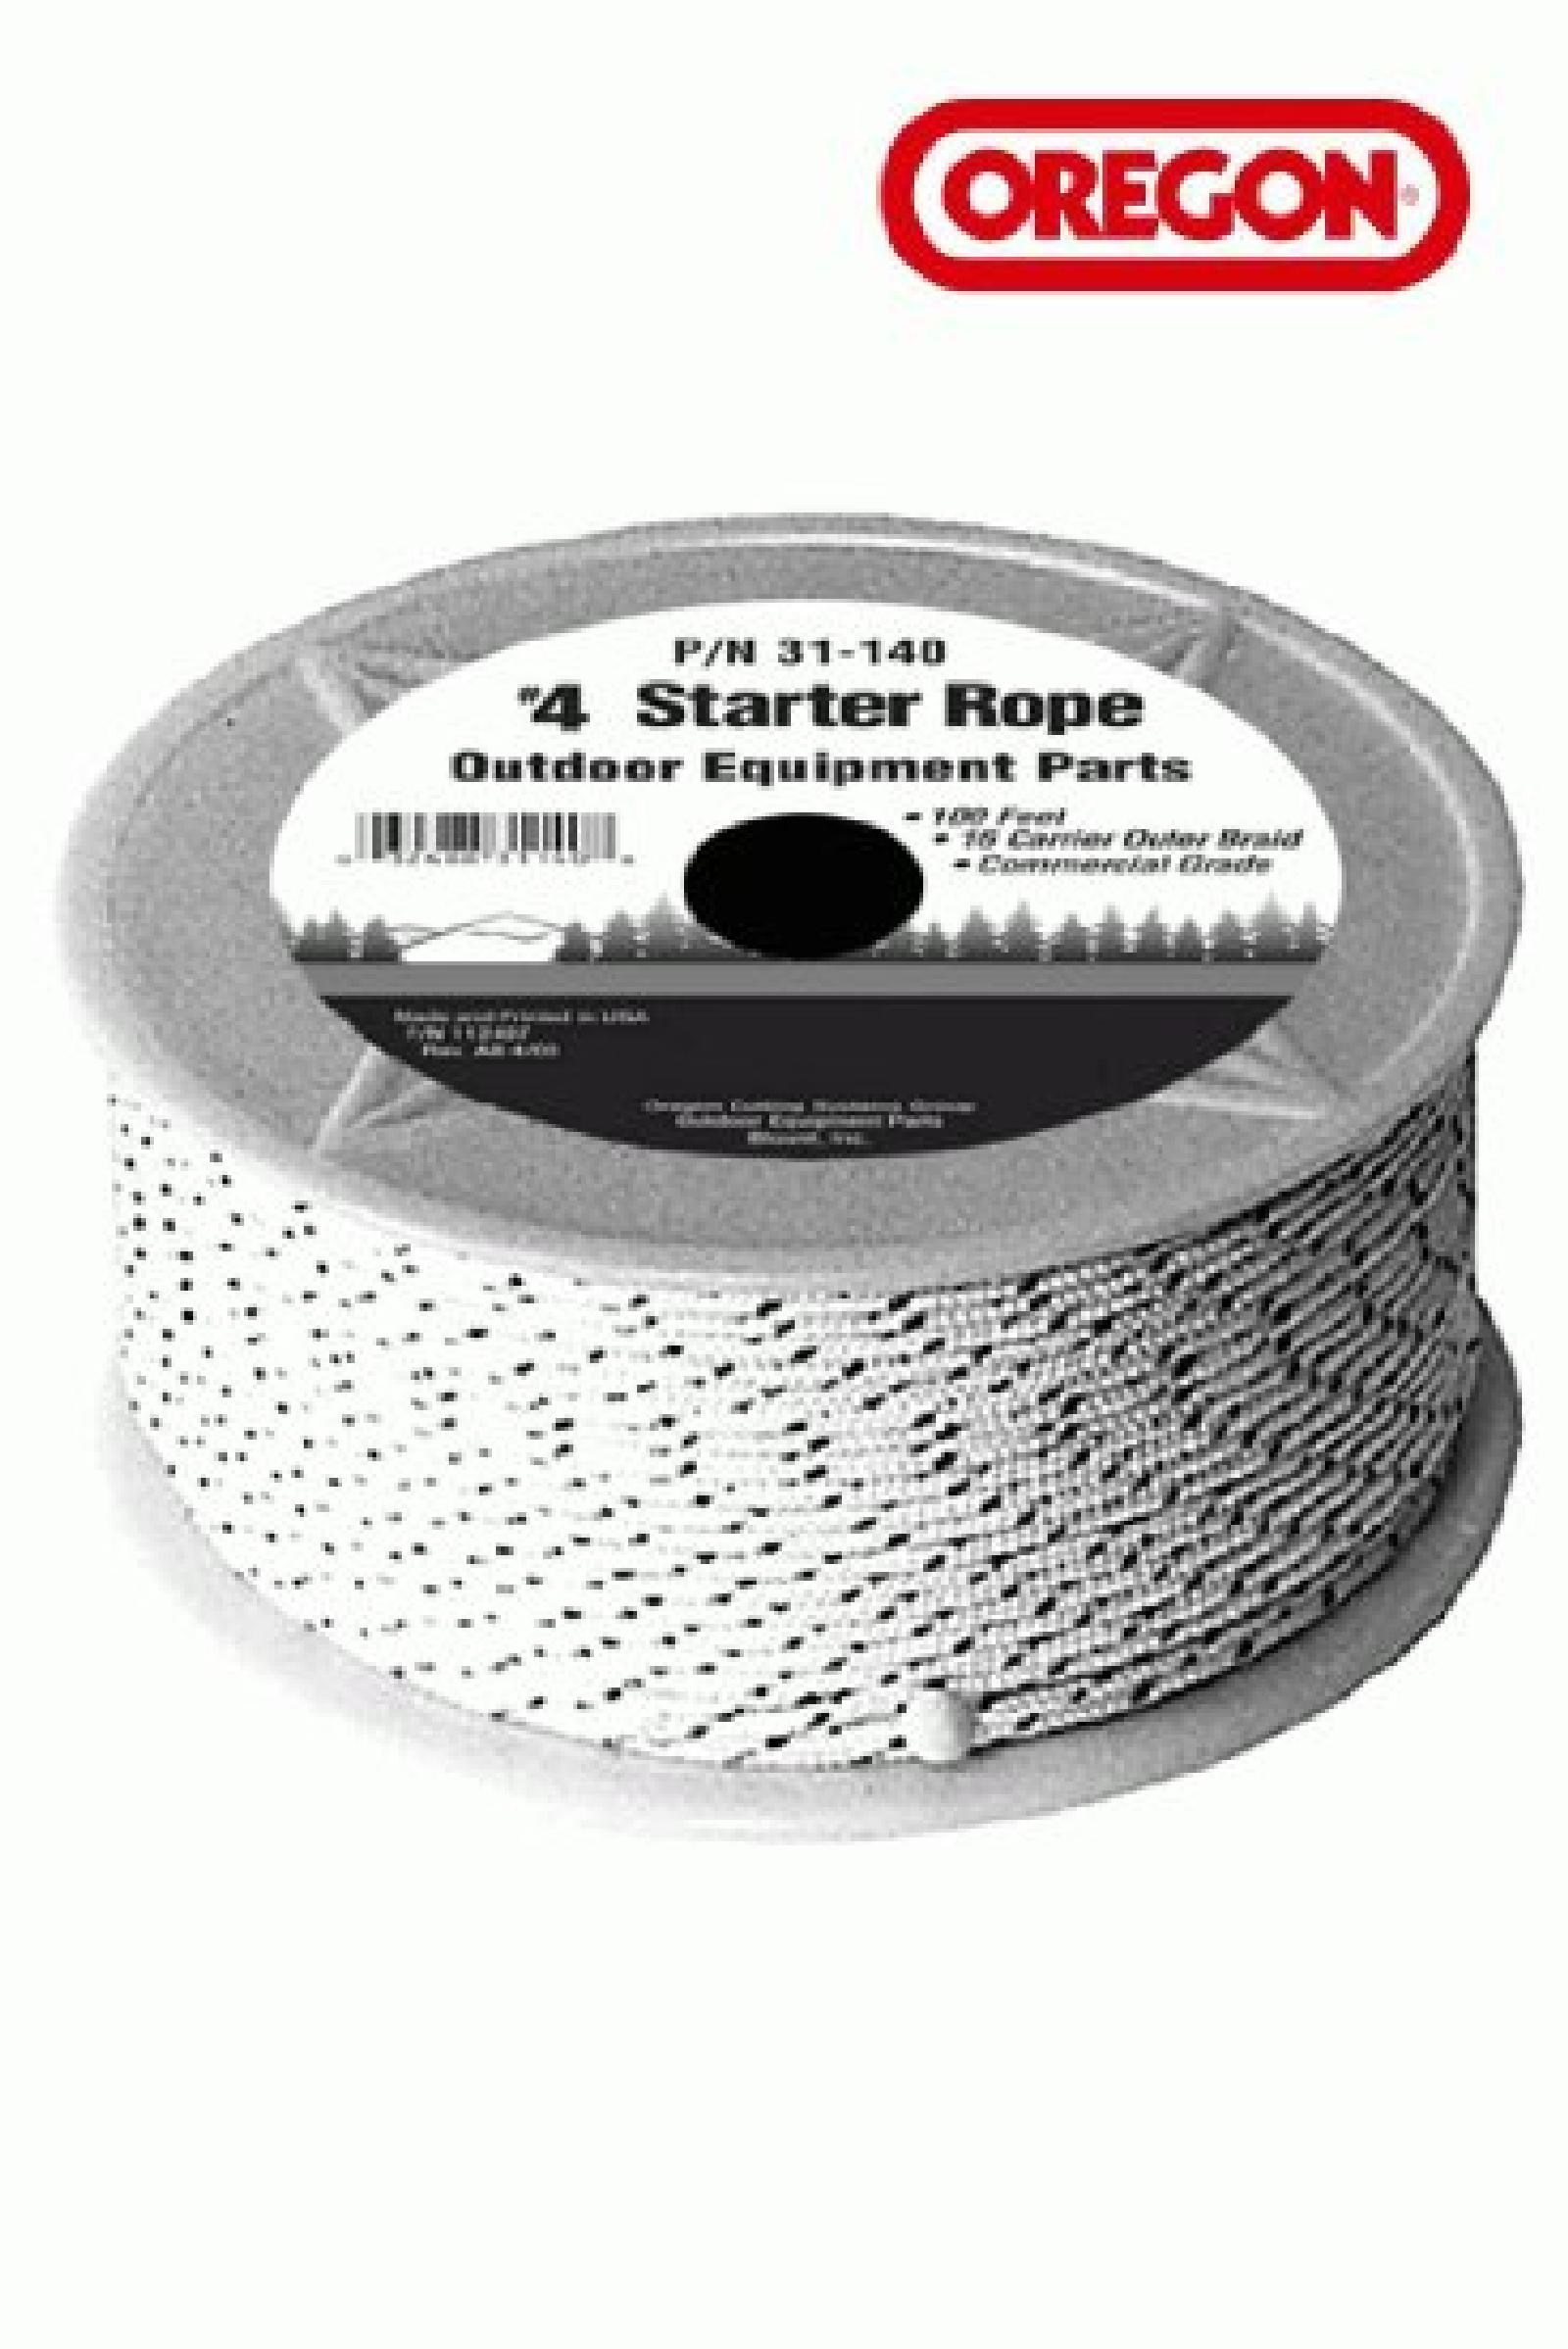 STARTER ROPE NO. 4 100FT part# 31-140 by Oregon